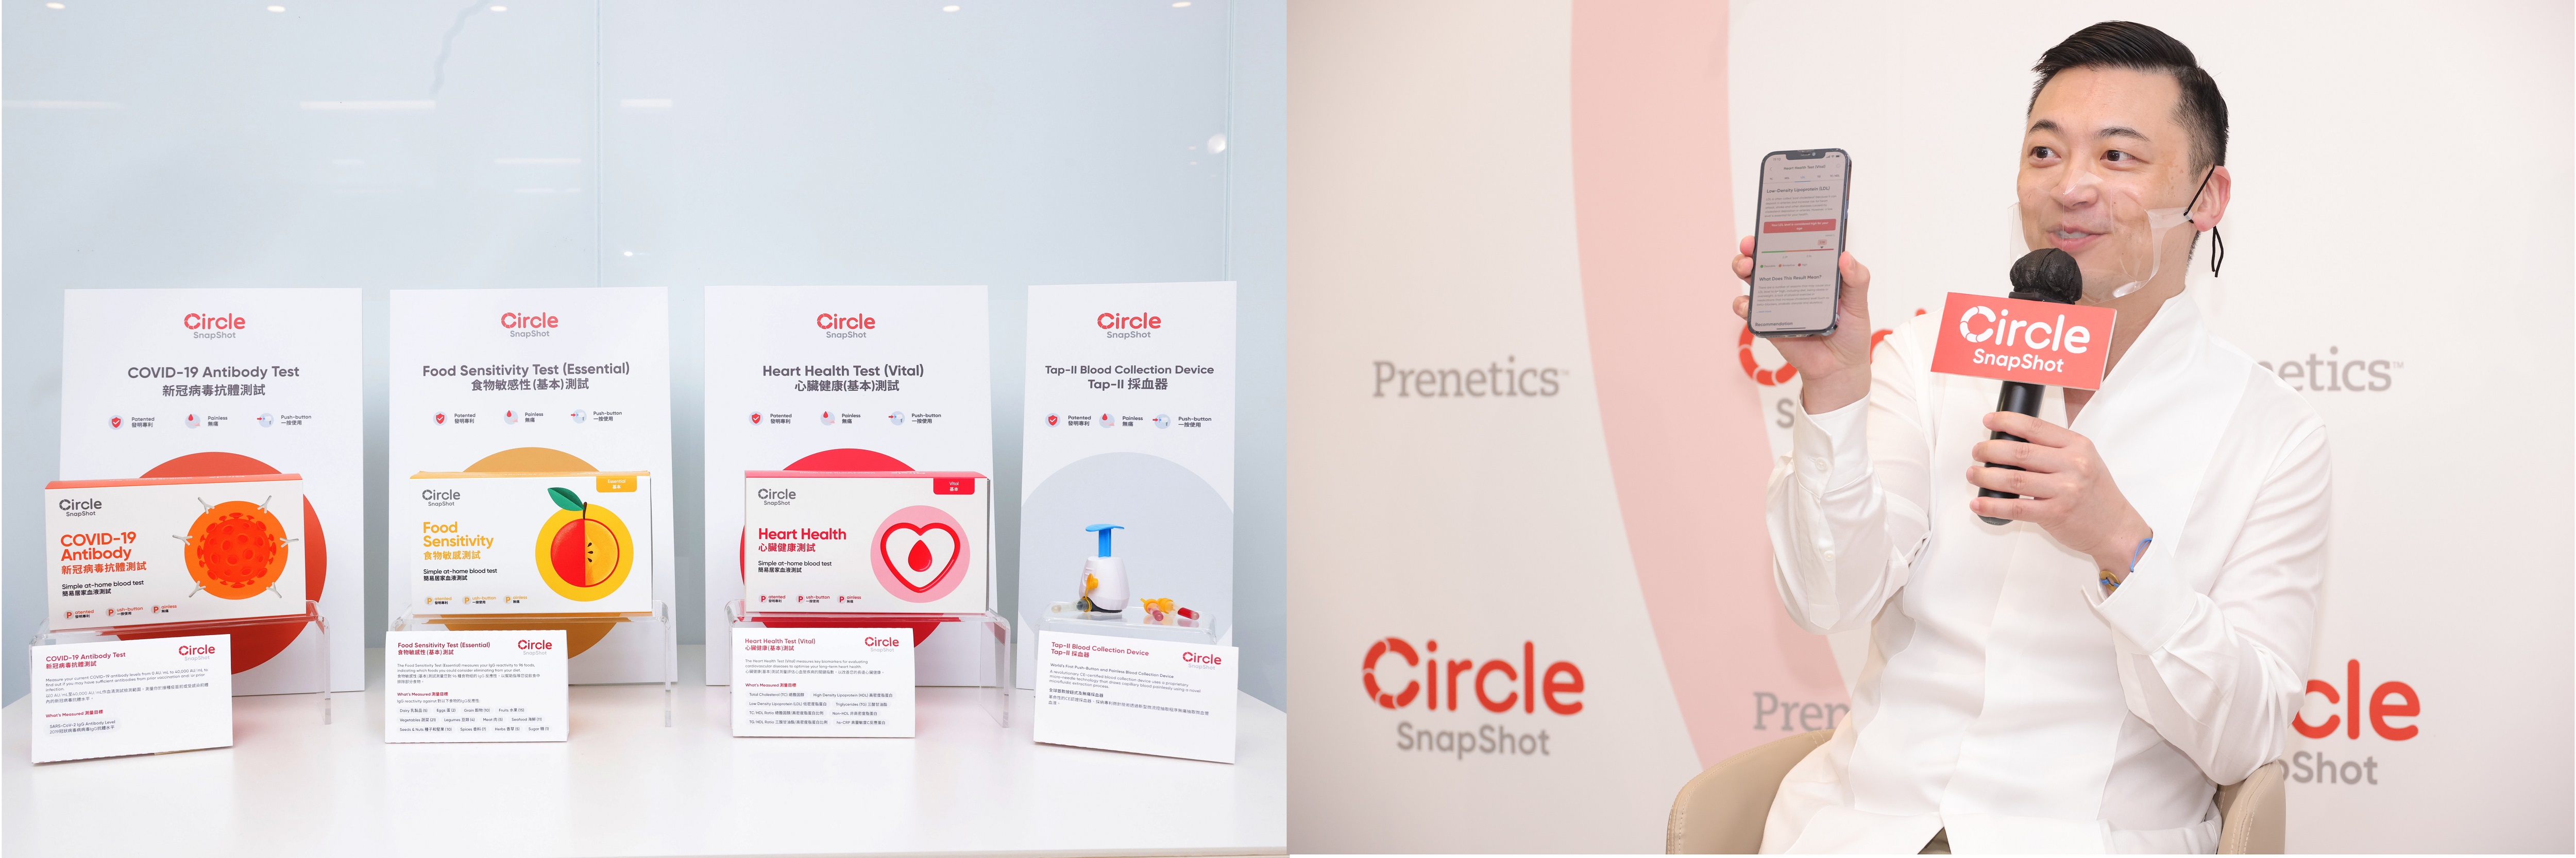 Prenetics launches Circle SnapShot at-home blood tests, covering COVID-19 Antibody Test, Food Sensitivity Test and Heart Health Test. Its revolutionary CE-certified blood collection device features a patented, push-button and painless blood collection function. Mr. Danny Yeung Sheng Wu, CEO and Co-Founder, Prenetics indicates that the test results will be shared via the Circle App, the exclusive Circle mobile application. The report will feature customized health management recommendations compiled by health experts or dietitians.